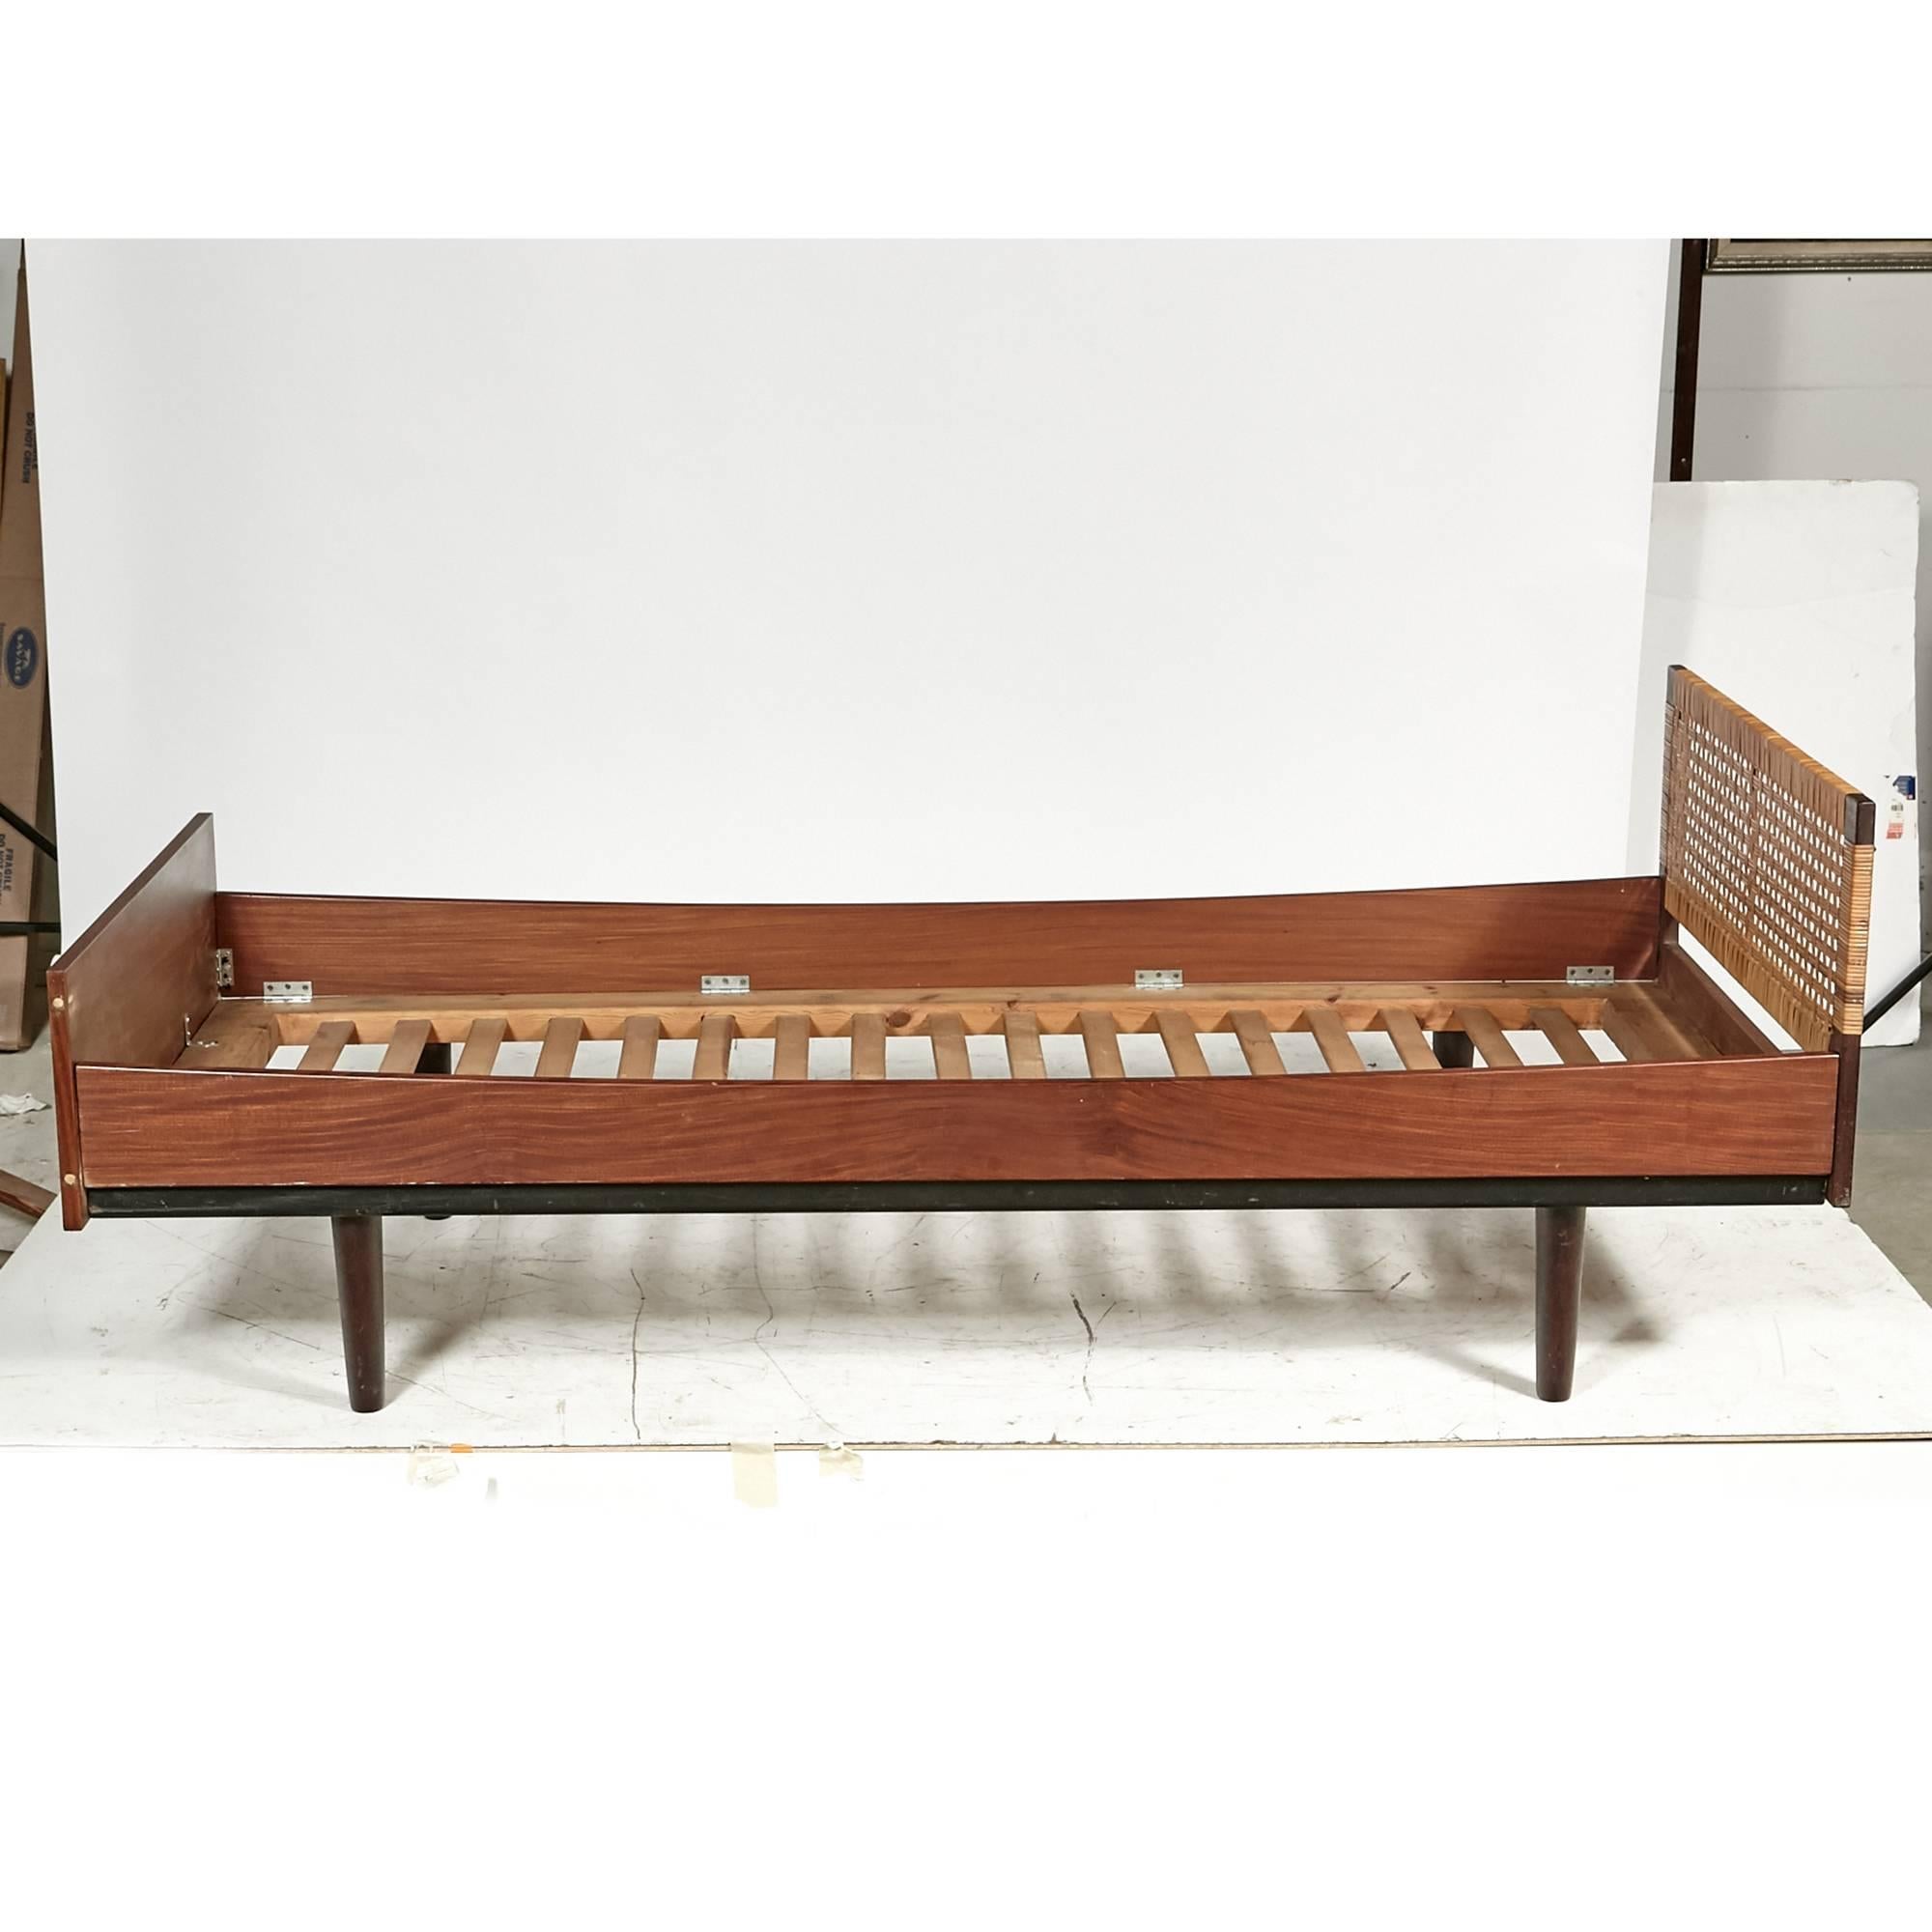 Danish teak child's single bed with a caned headboard designed by Hans J. Wegner for GETAMA, 1960s. Bed has slats included. Headboard detaches from the bed. No marks.